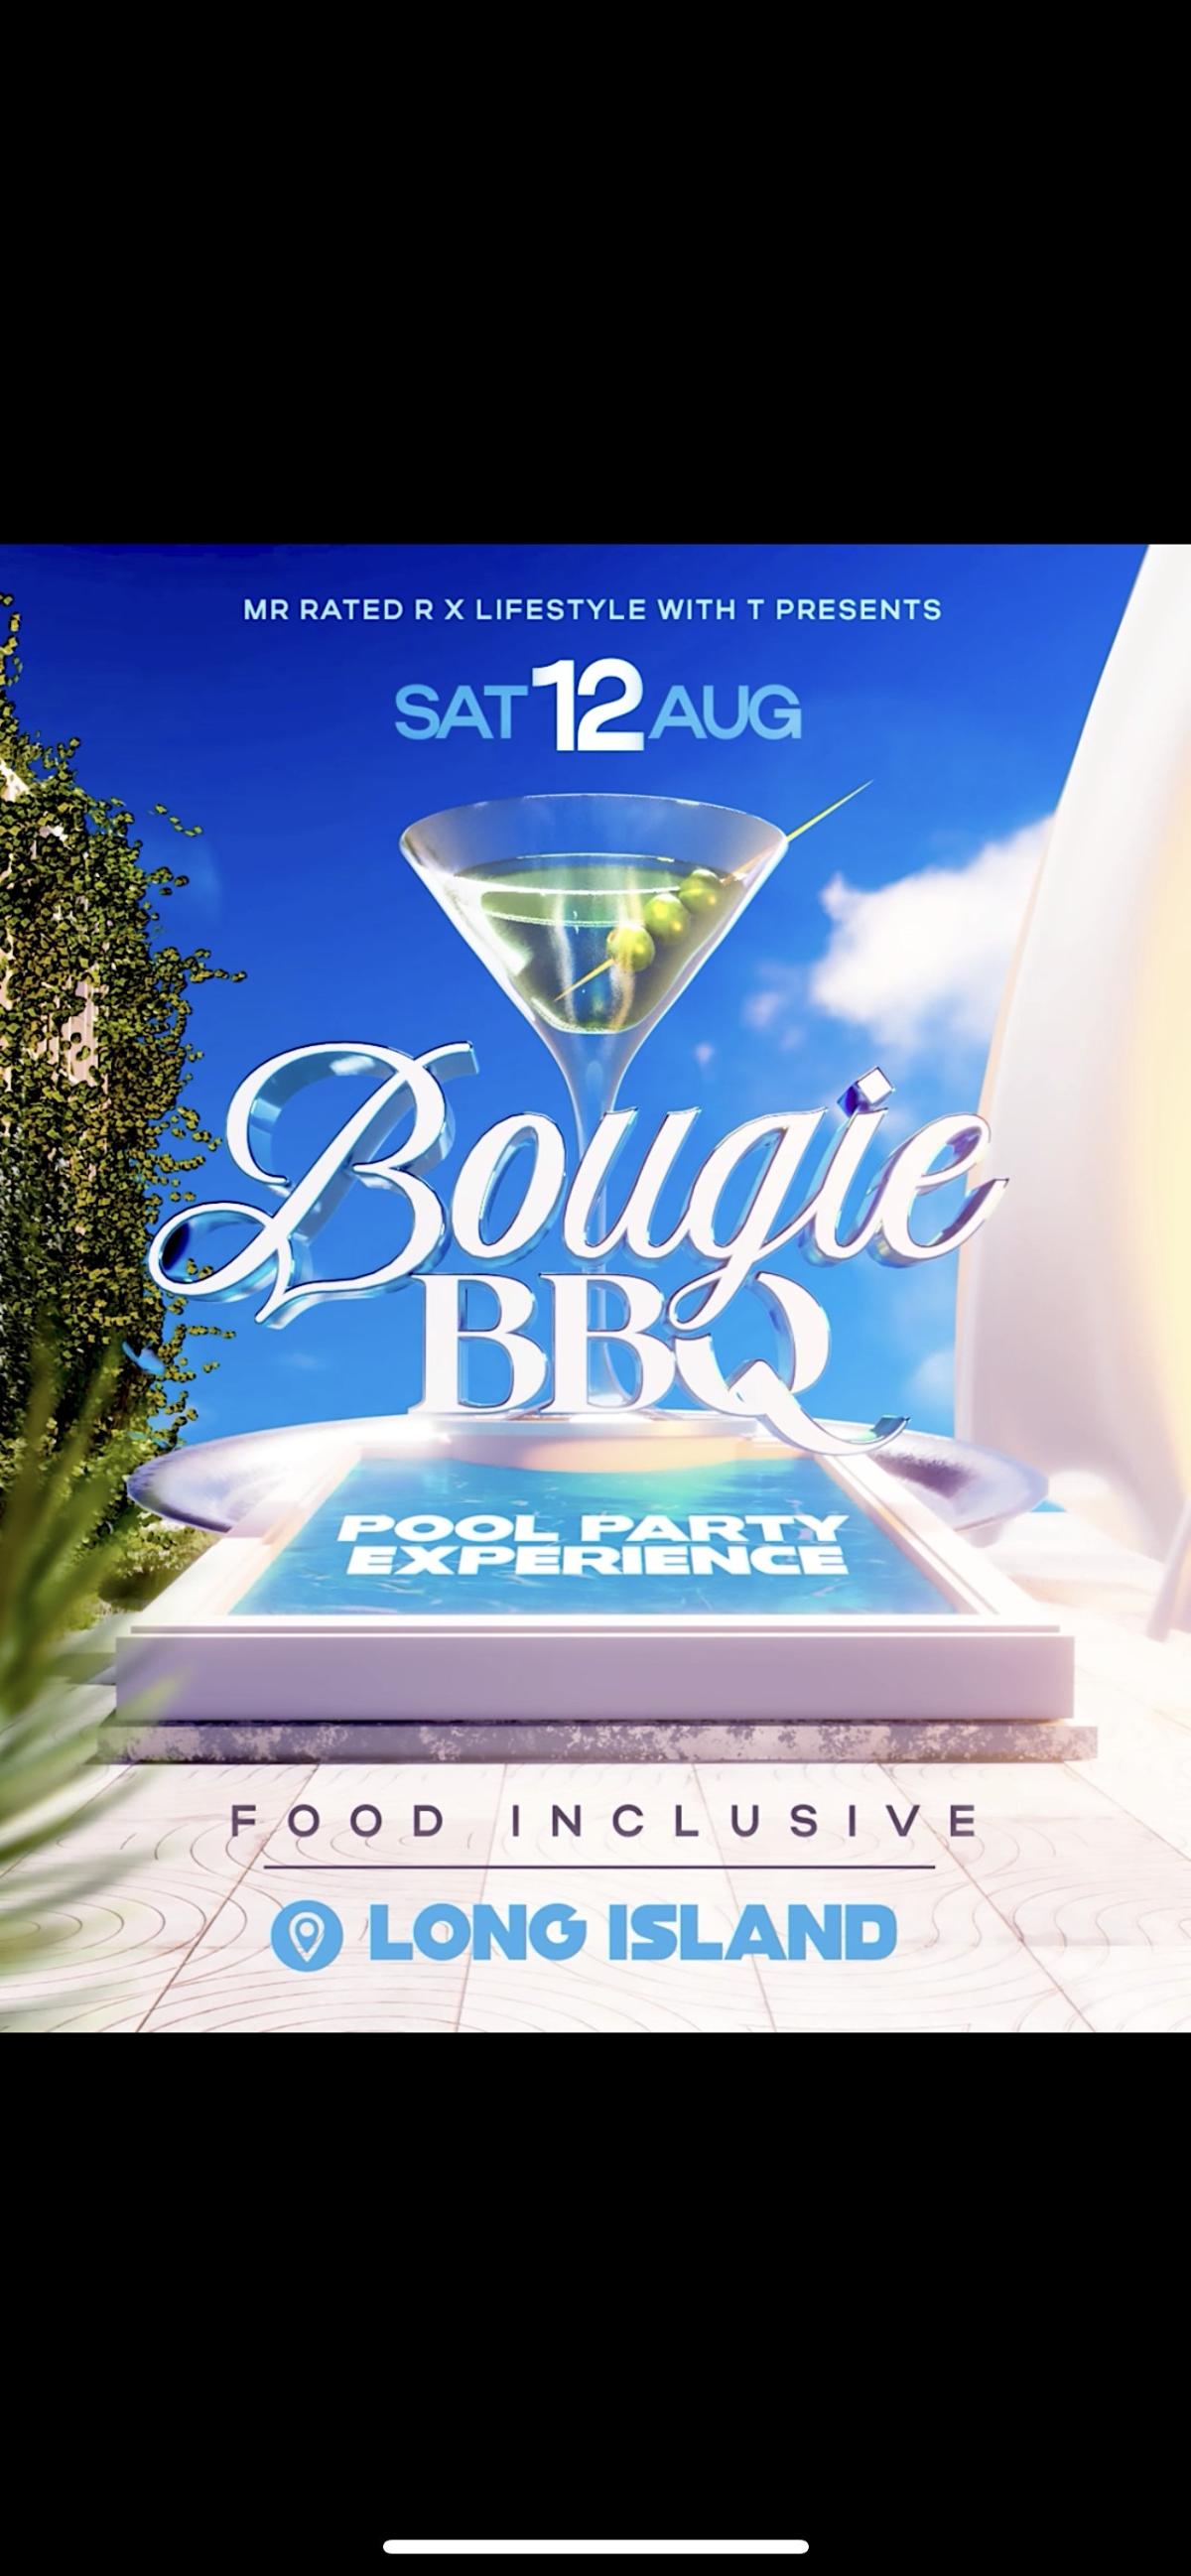 Bougie BBQ: Pool Party Experience flyer or graphic.